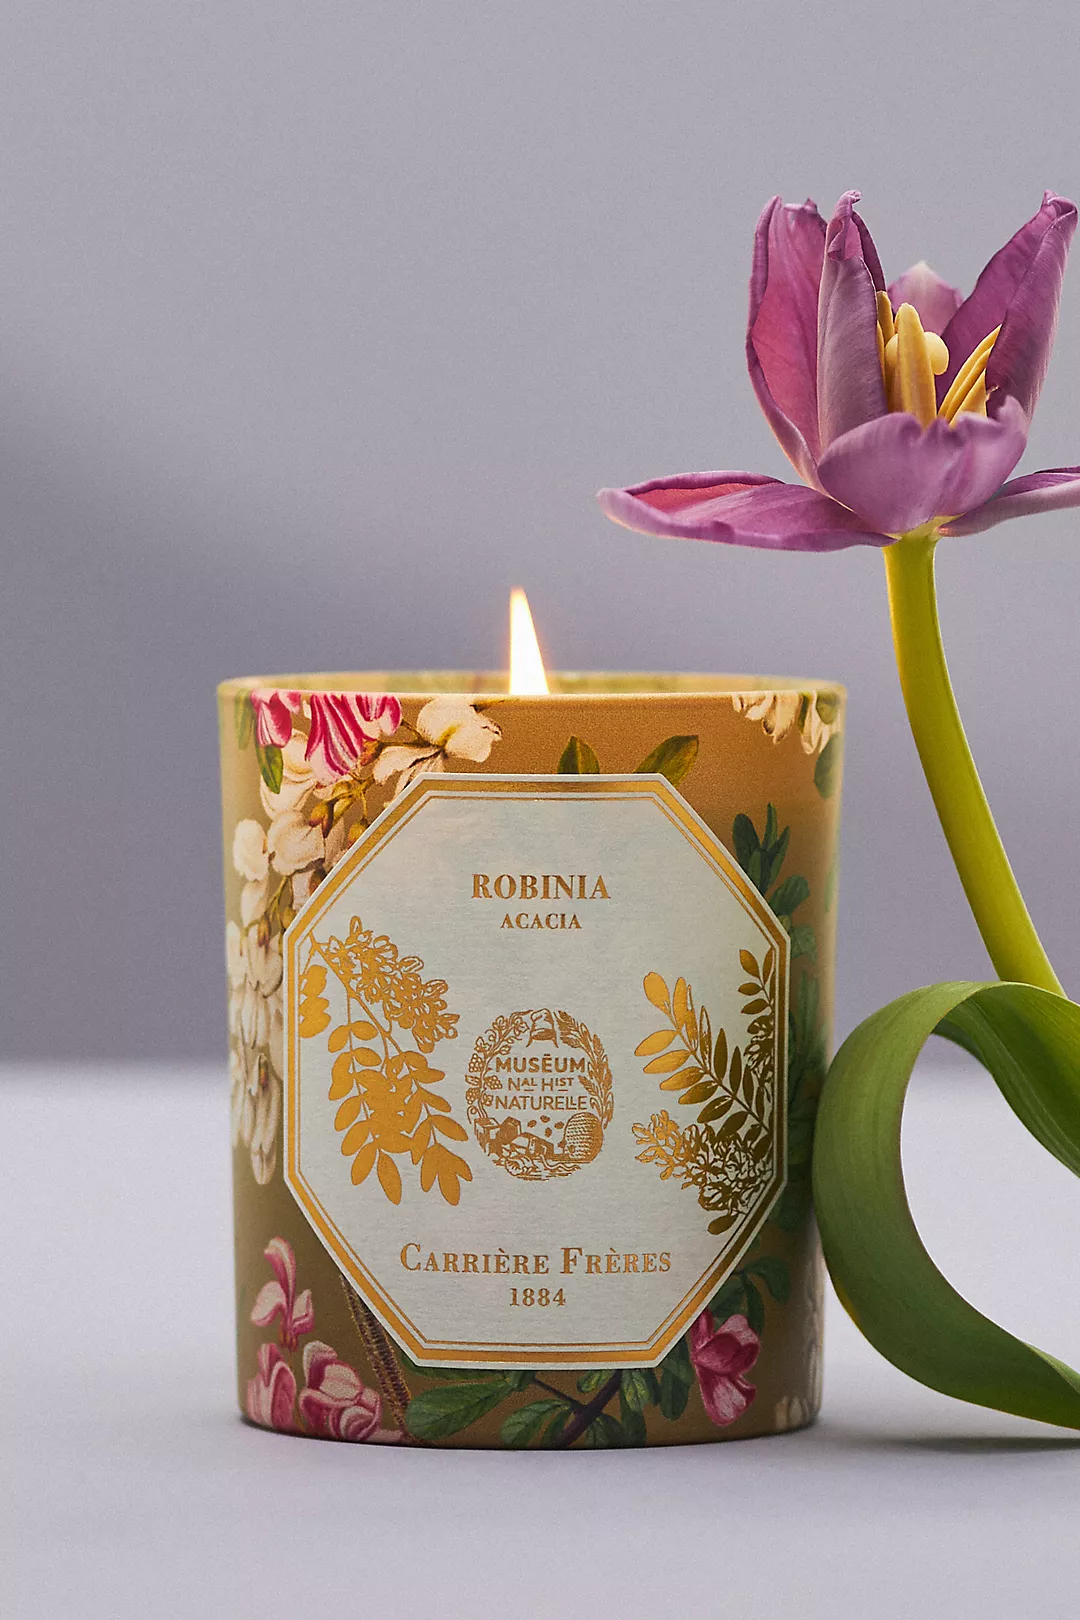 Carrière Frères Robinia Acacia Boxed Candle